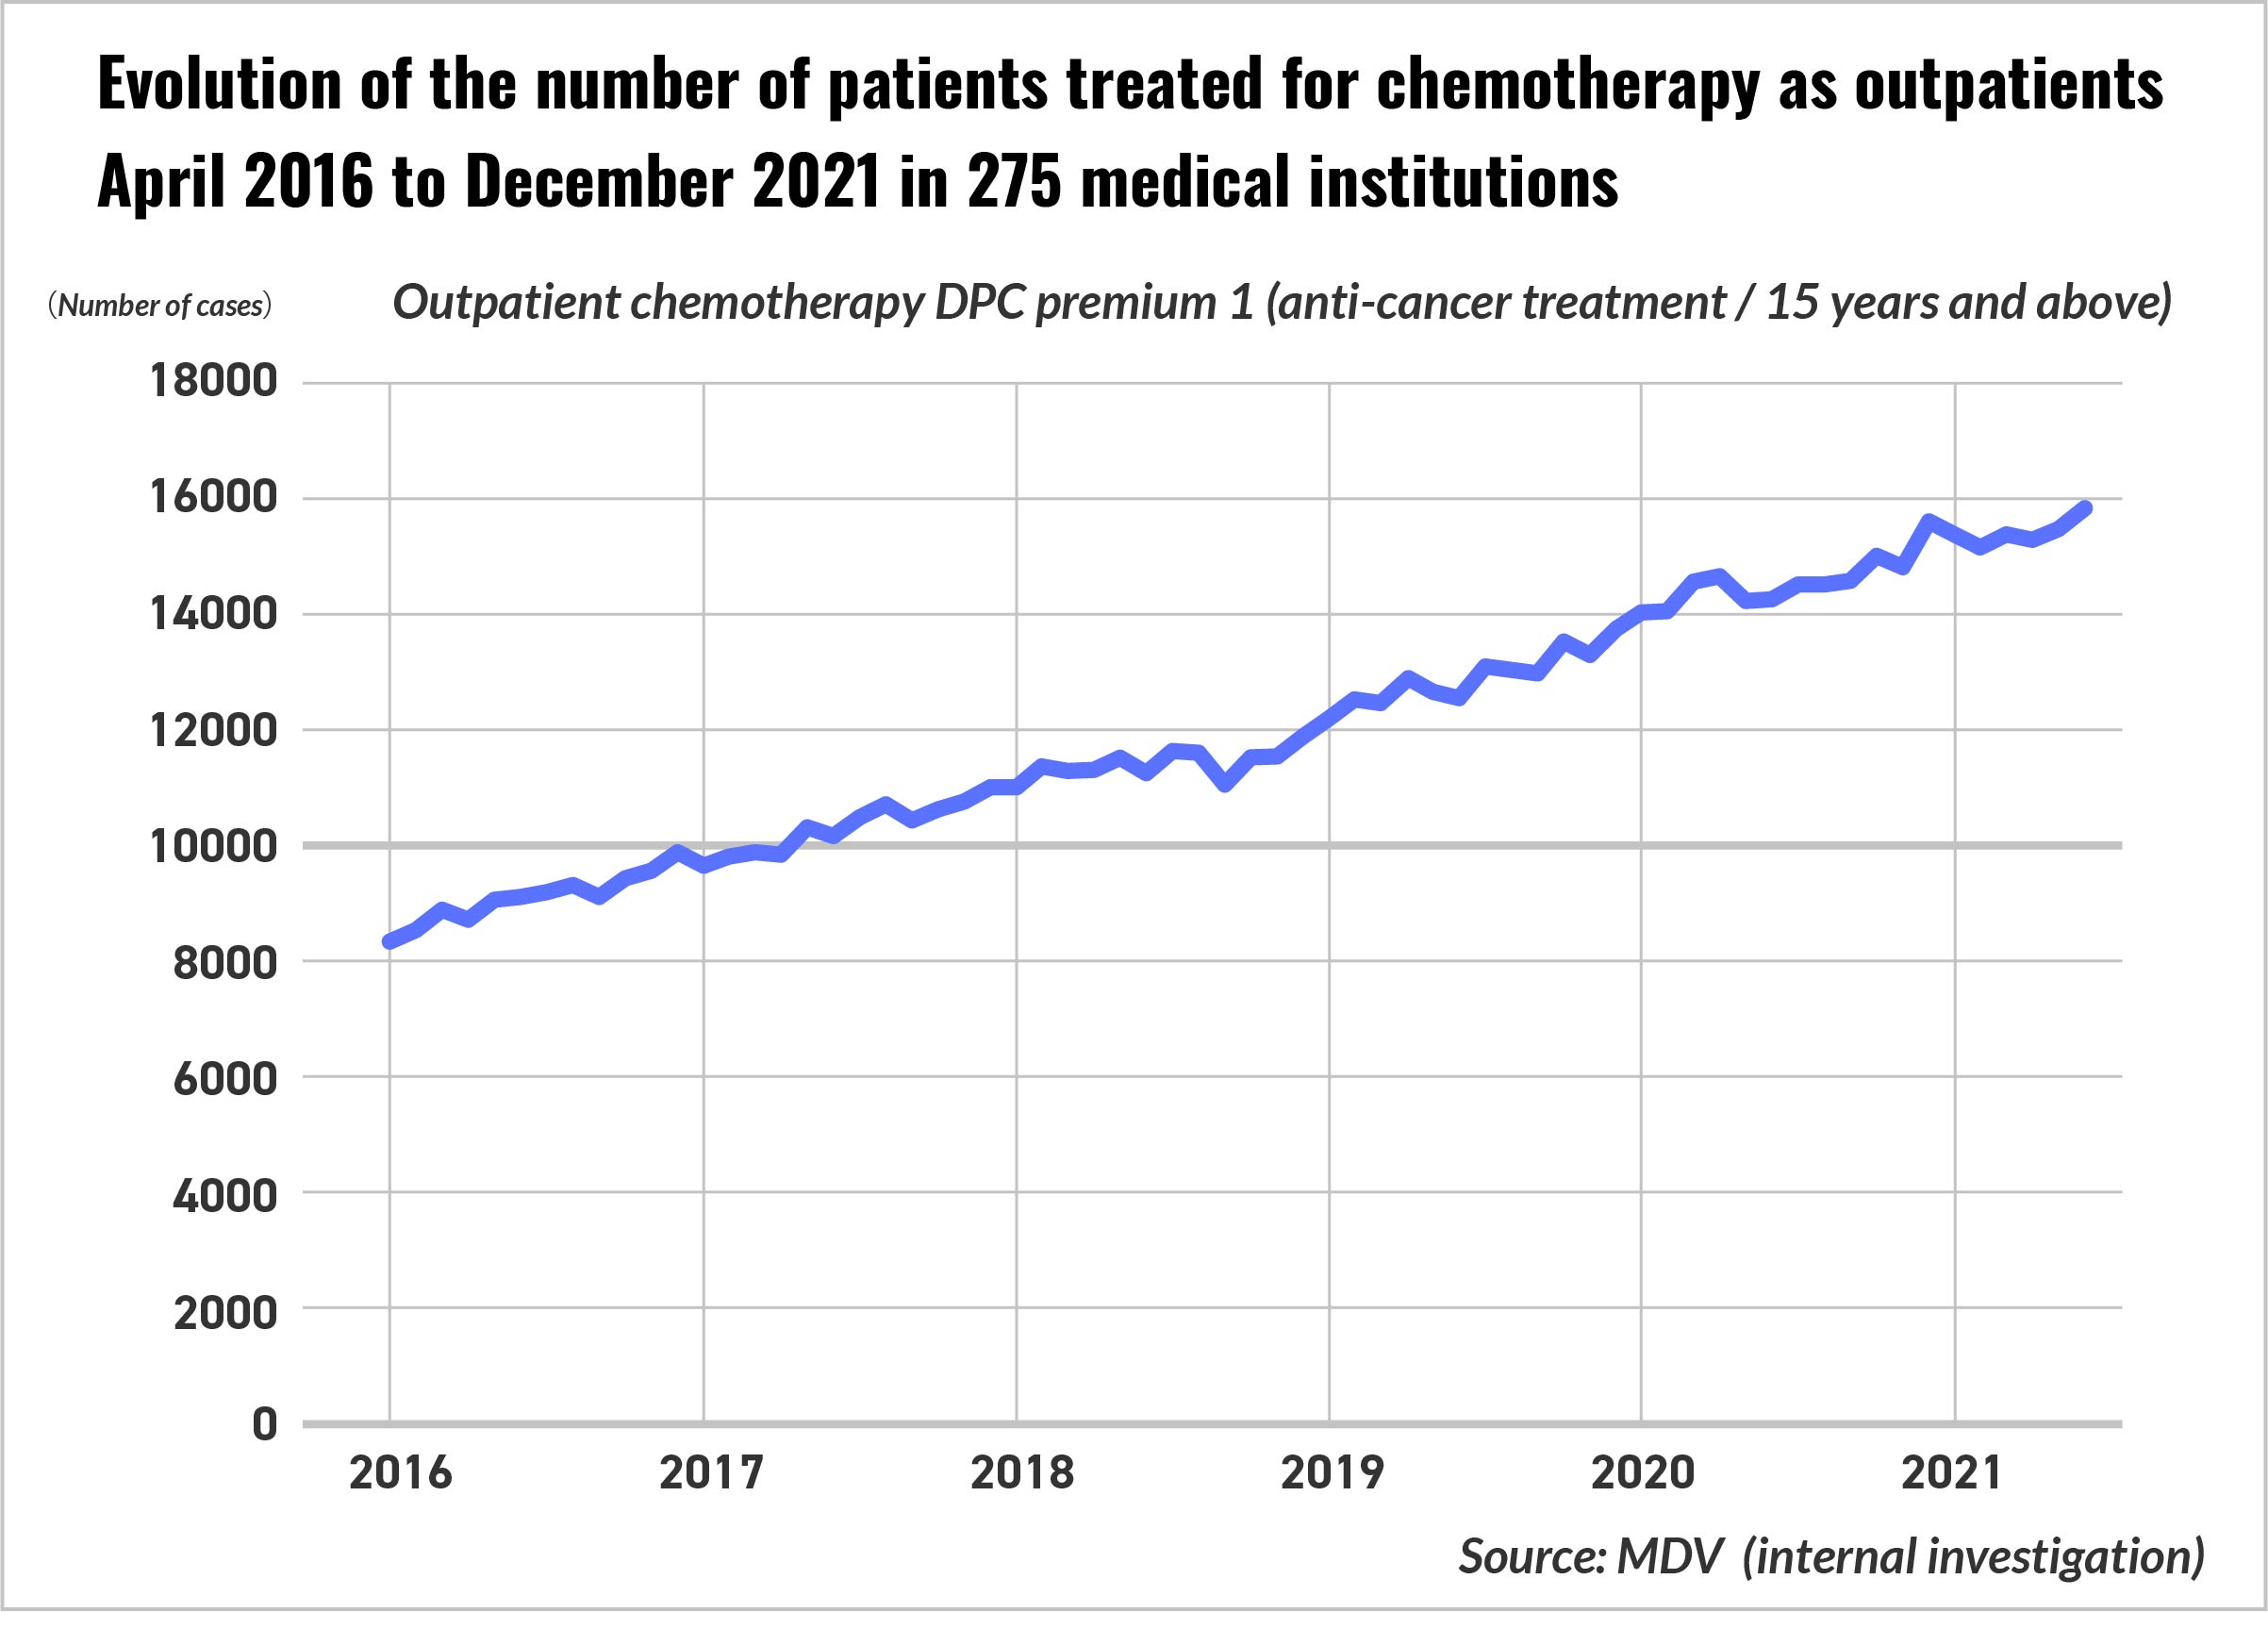 Evolution of the number of patients treated for chemotherapy as outpatients April 2016 to December 2021 in 275 medical institutions